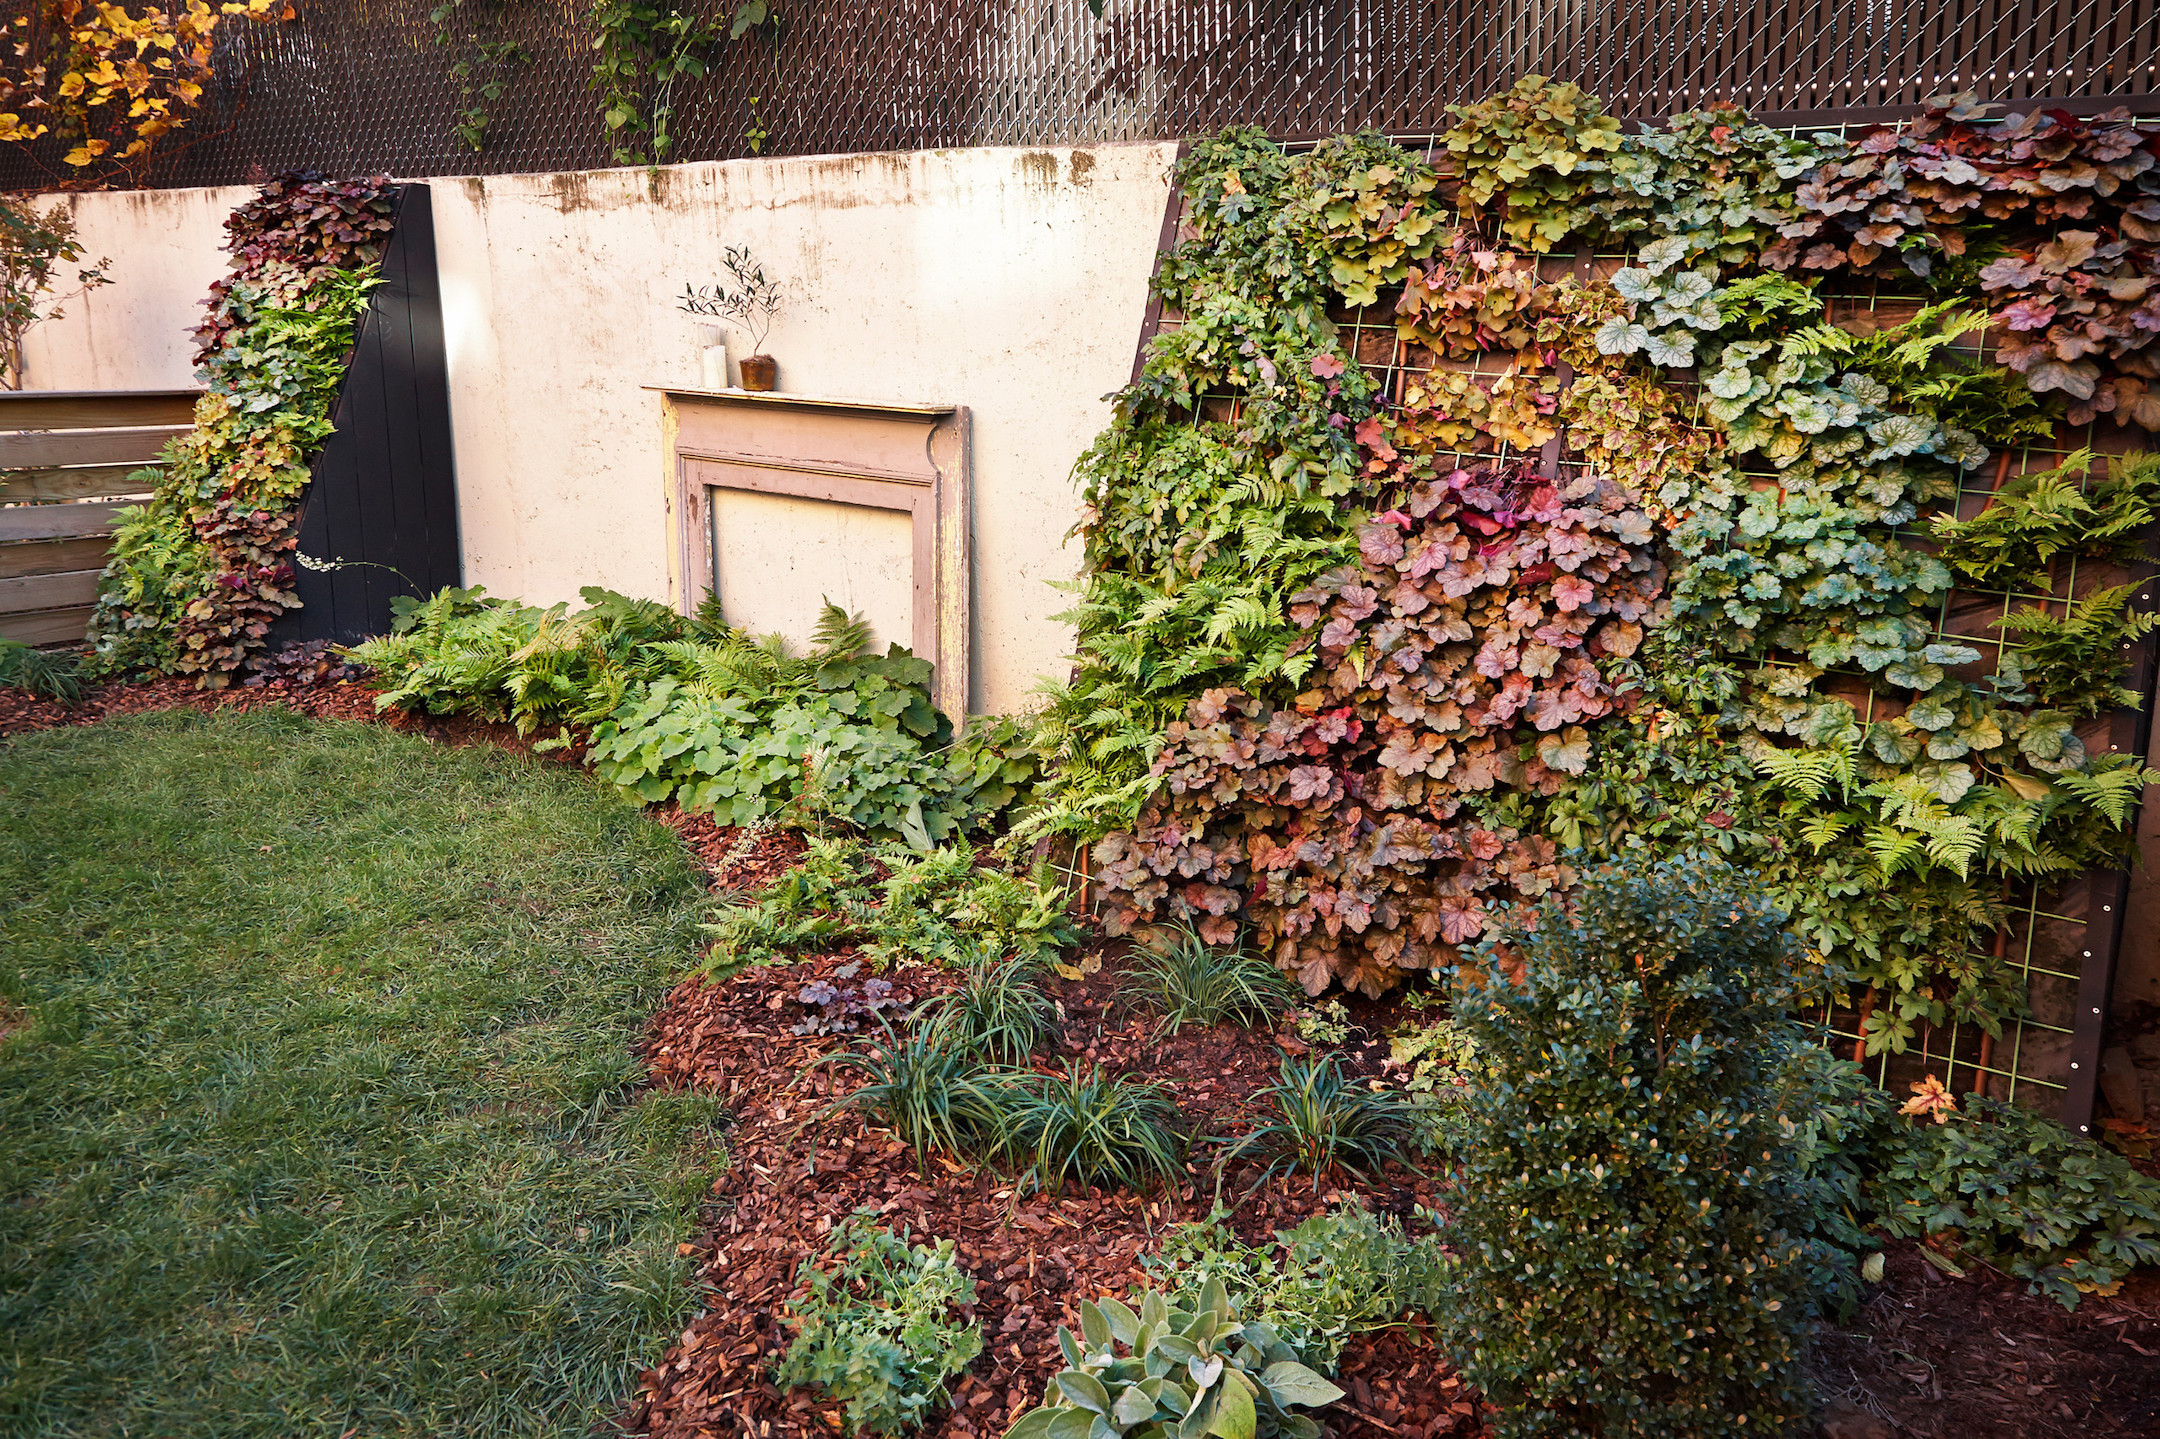 backyard with mulch landscaping and large square trellis covered in vines against wall